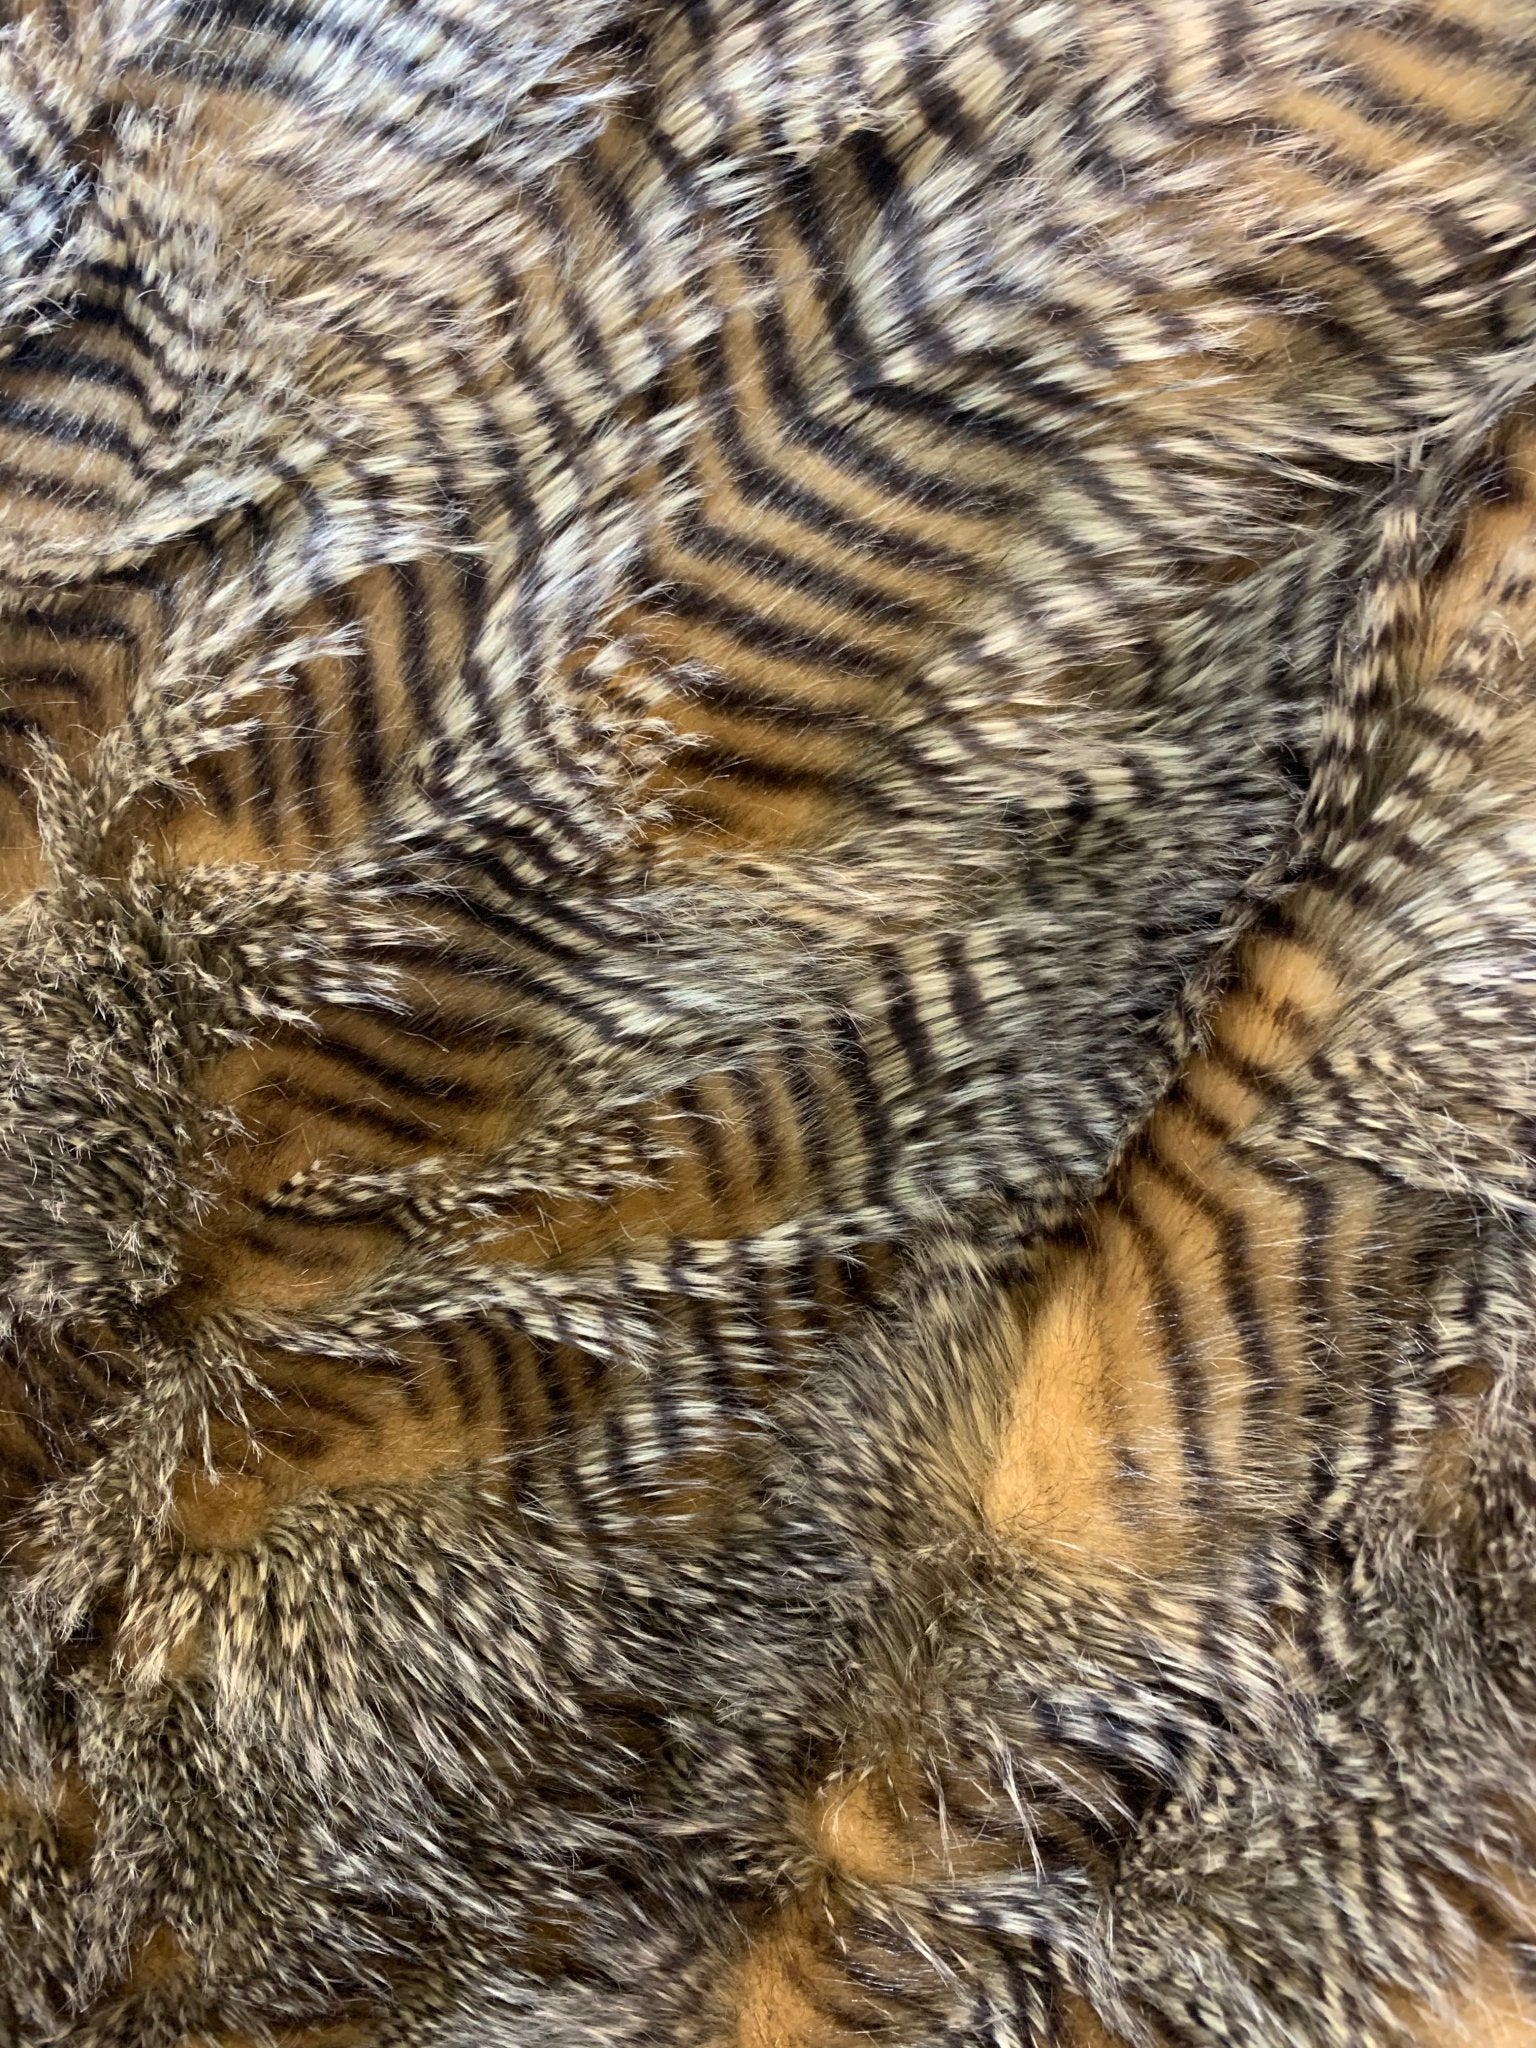 Faux Fake Fur Feathered Bird Long Pile Fabric | Faux Fur MaterialICEFABRICICE FABRICSGoldBy The Yard (60 inches Wide)Faux Fake Fur Feathered Bird Long Pile Fabric | Faux Fur Material ICEFABRIC Gold